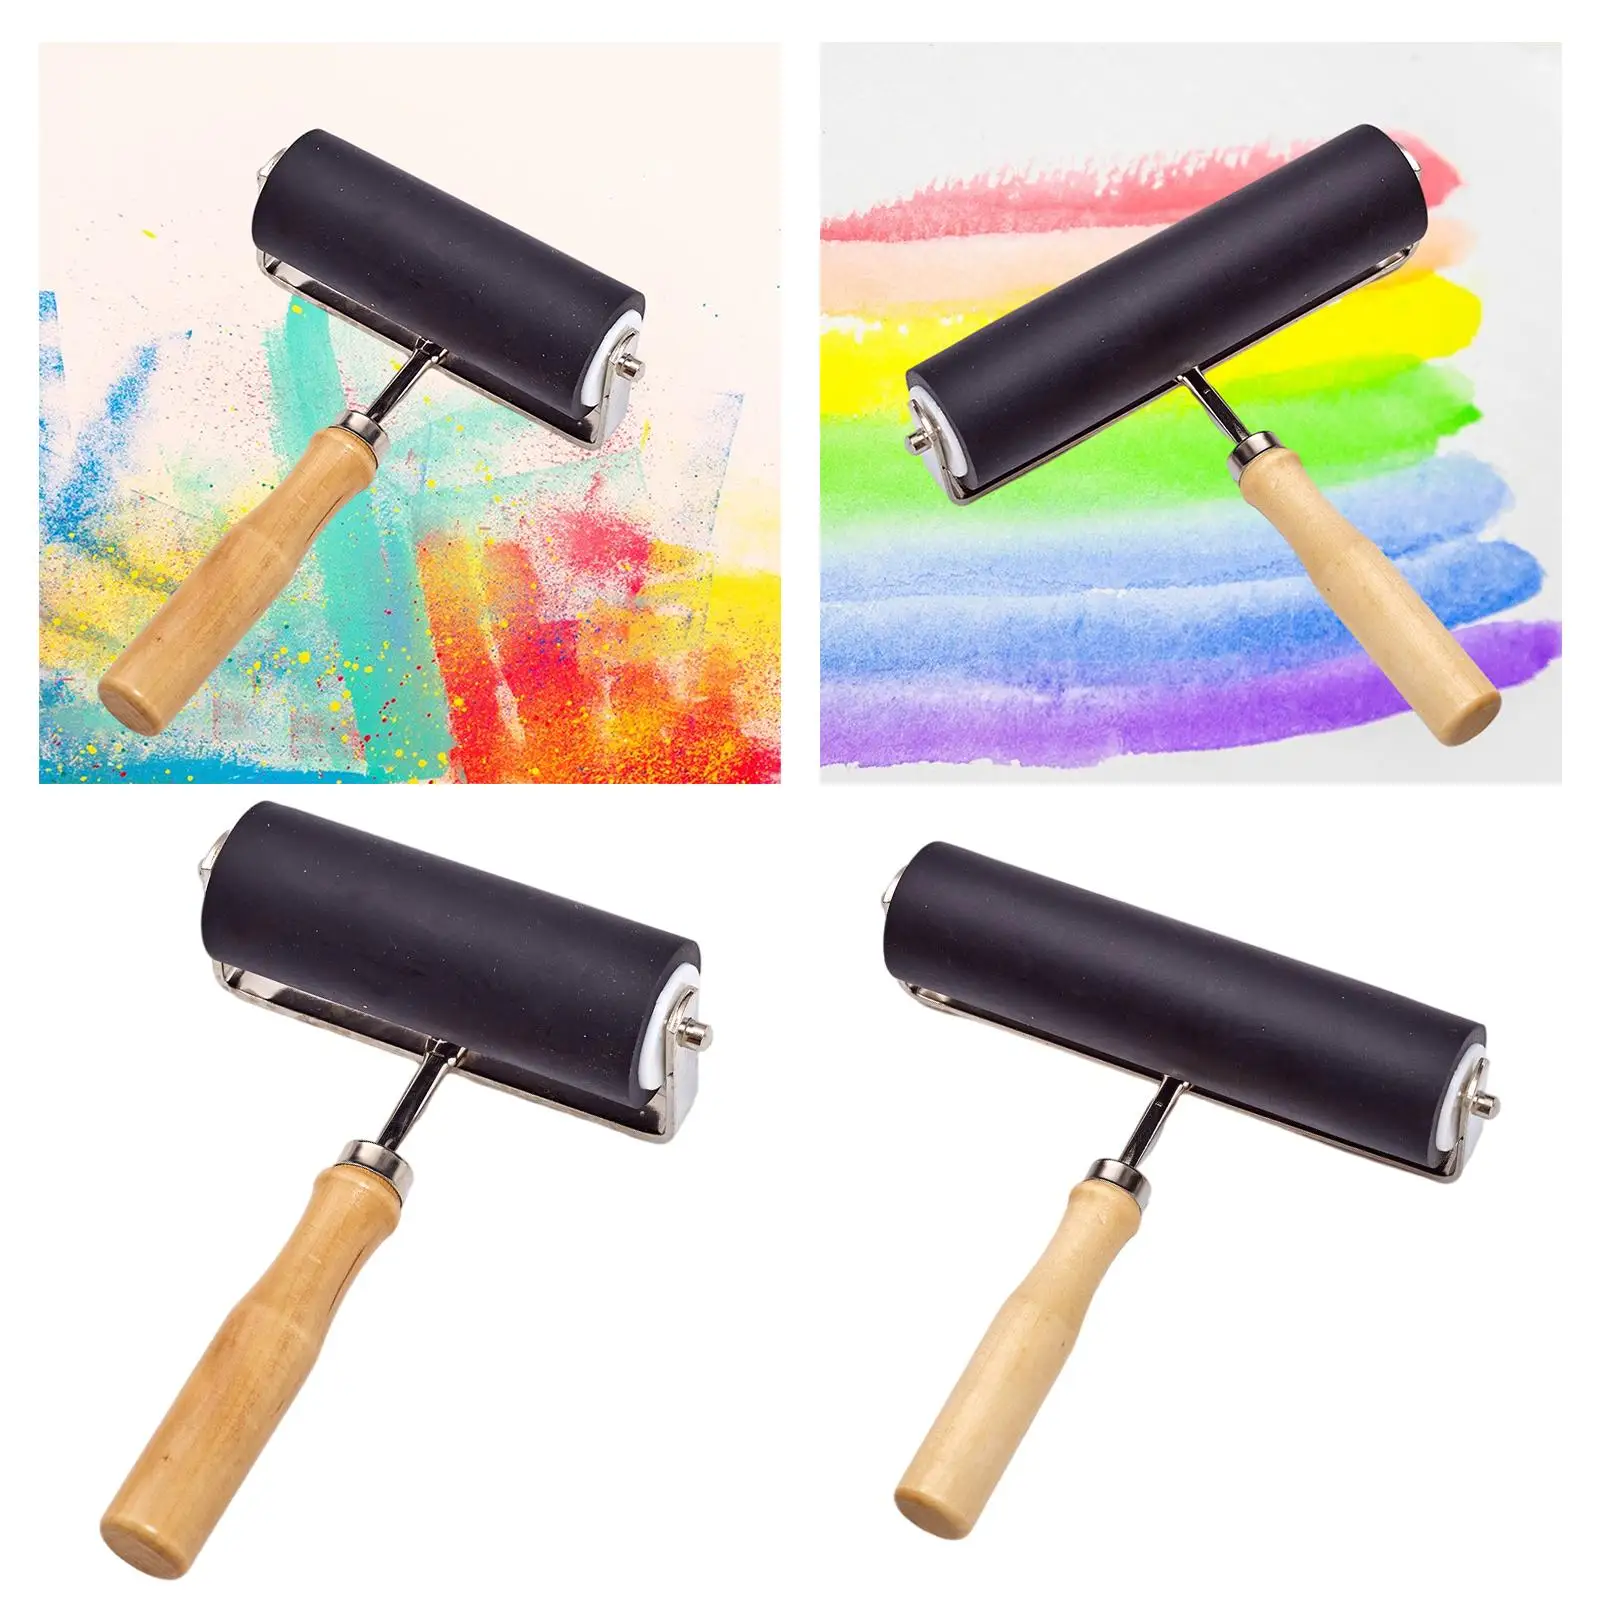 Heavy Duty Rubber Roller Stamping Tool Wood Handle Painting Printmaking Glue